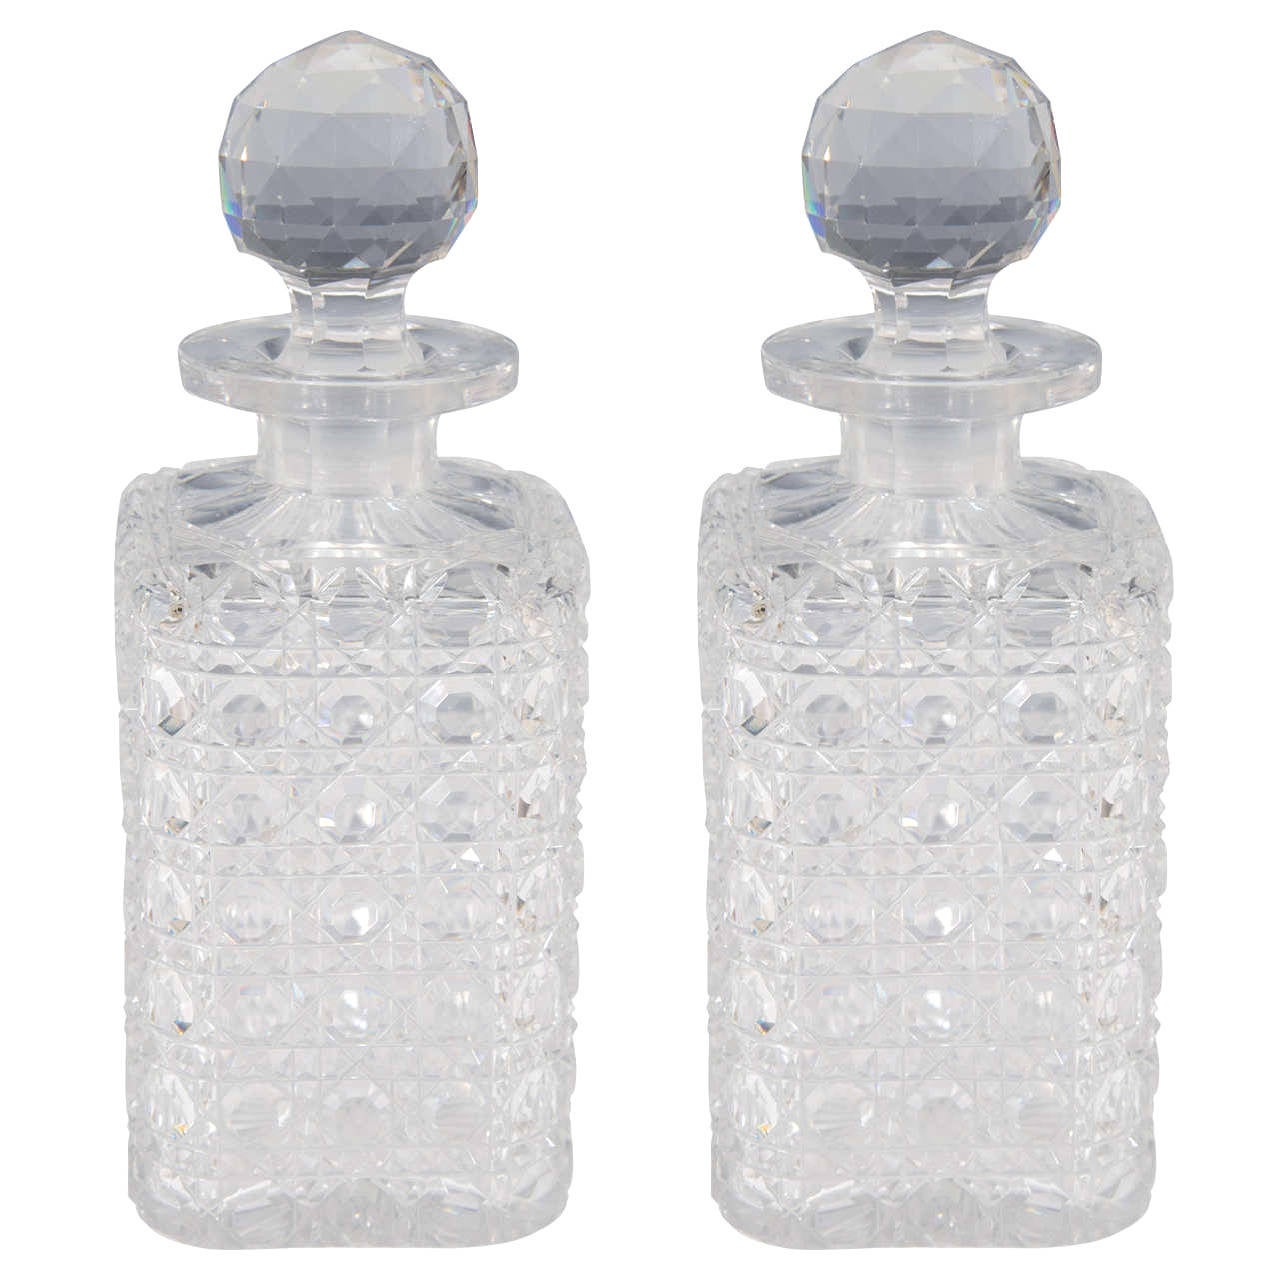 Antique 'Brilliant' Cut Crystal Decanters with English Sterling Silver Labels